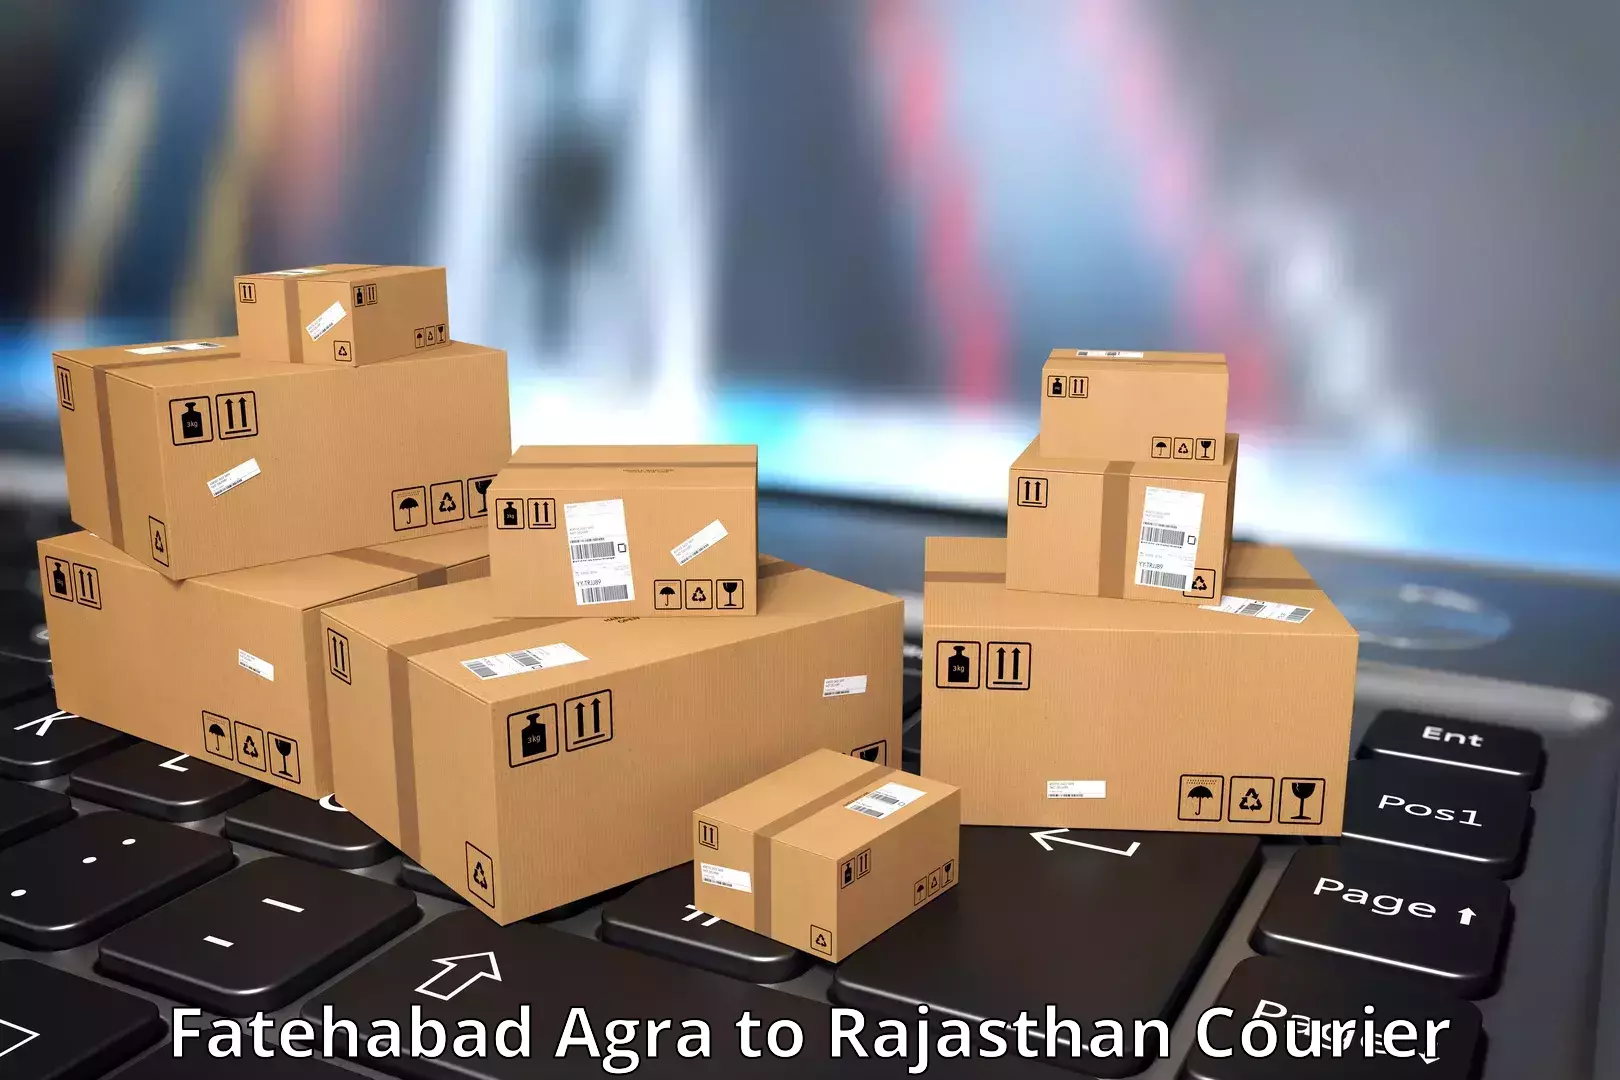 Lightweight parcel options Fatehabad Agra to Rajasthan